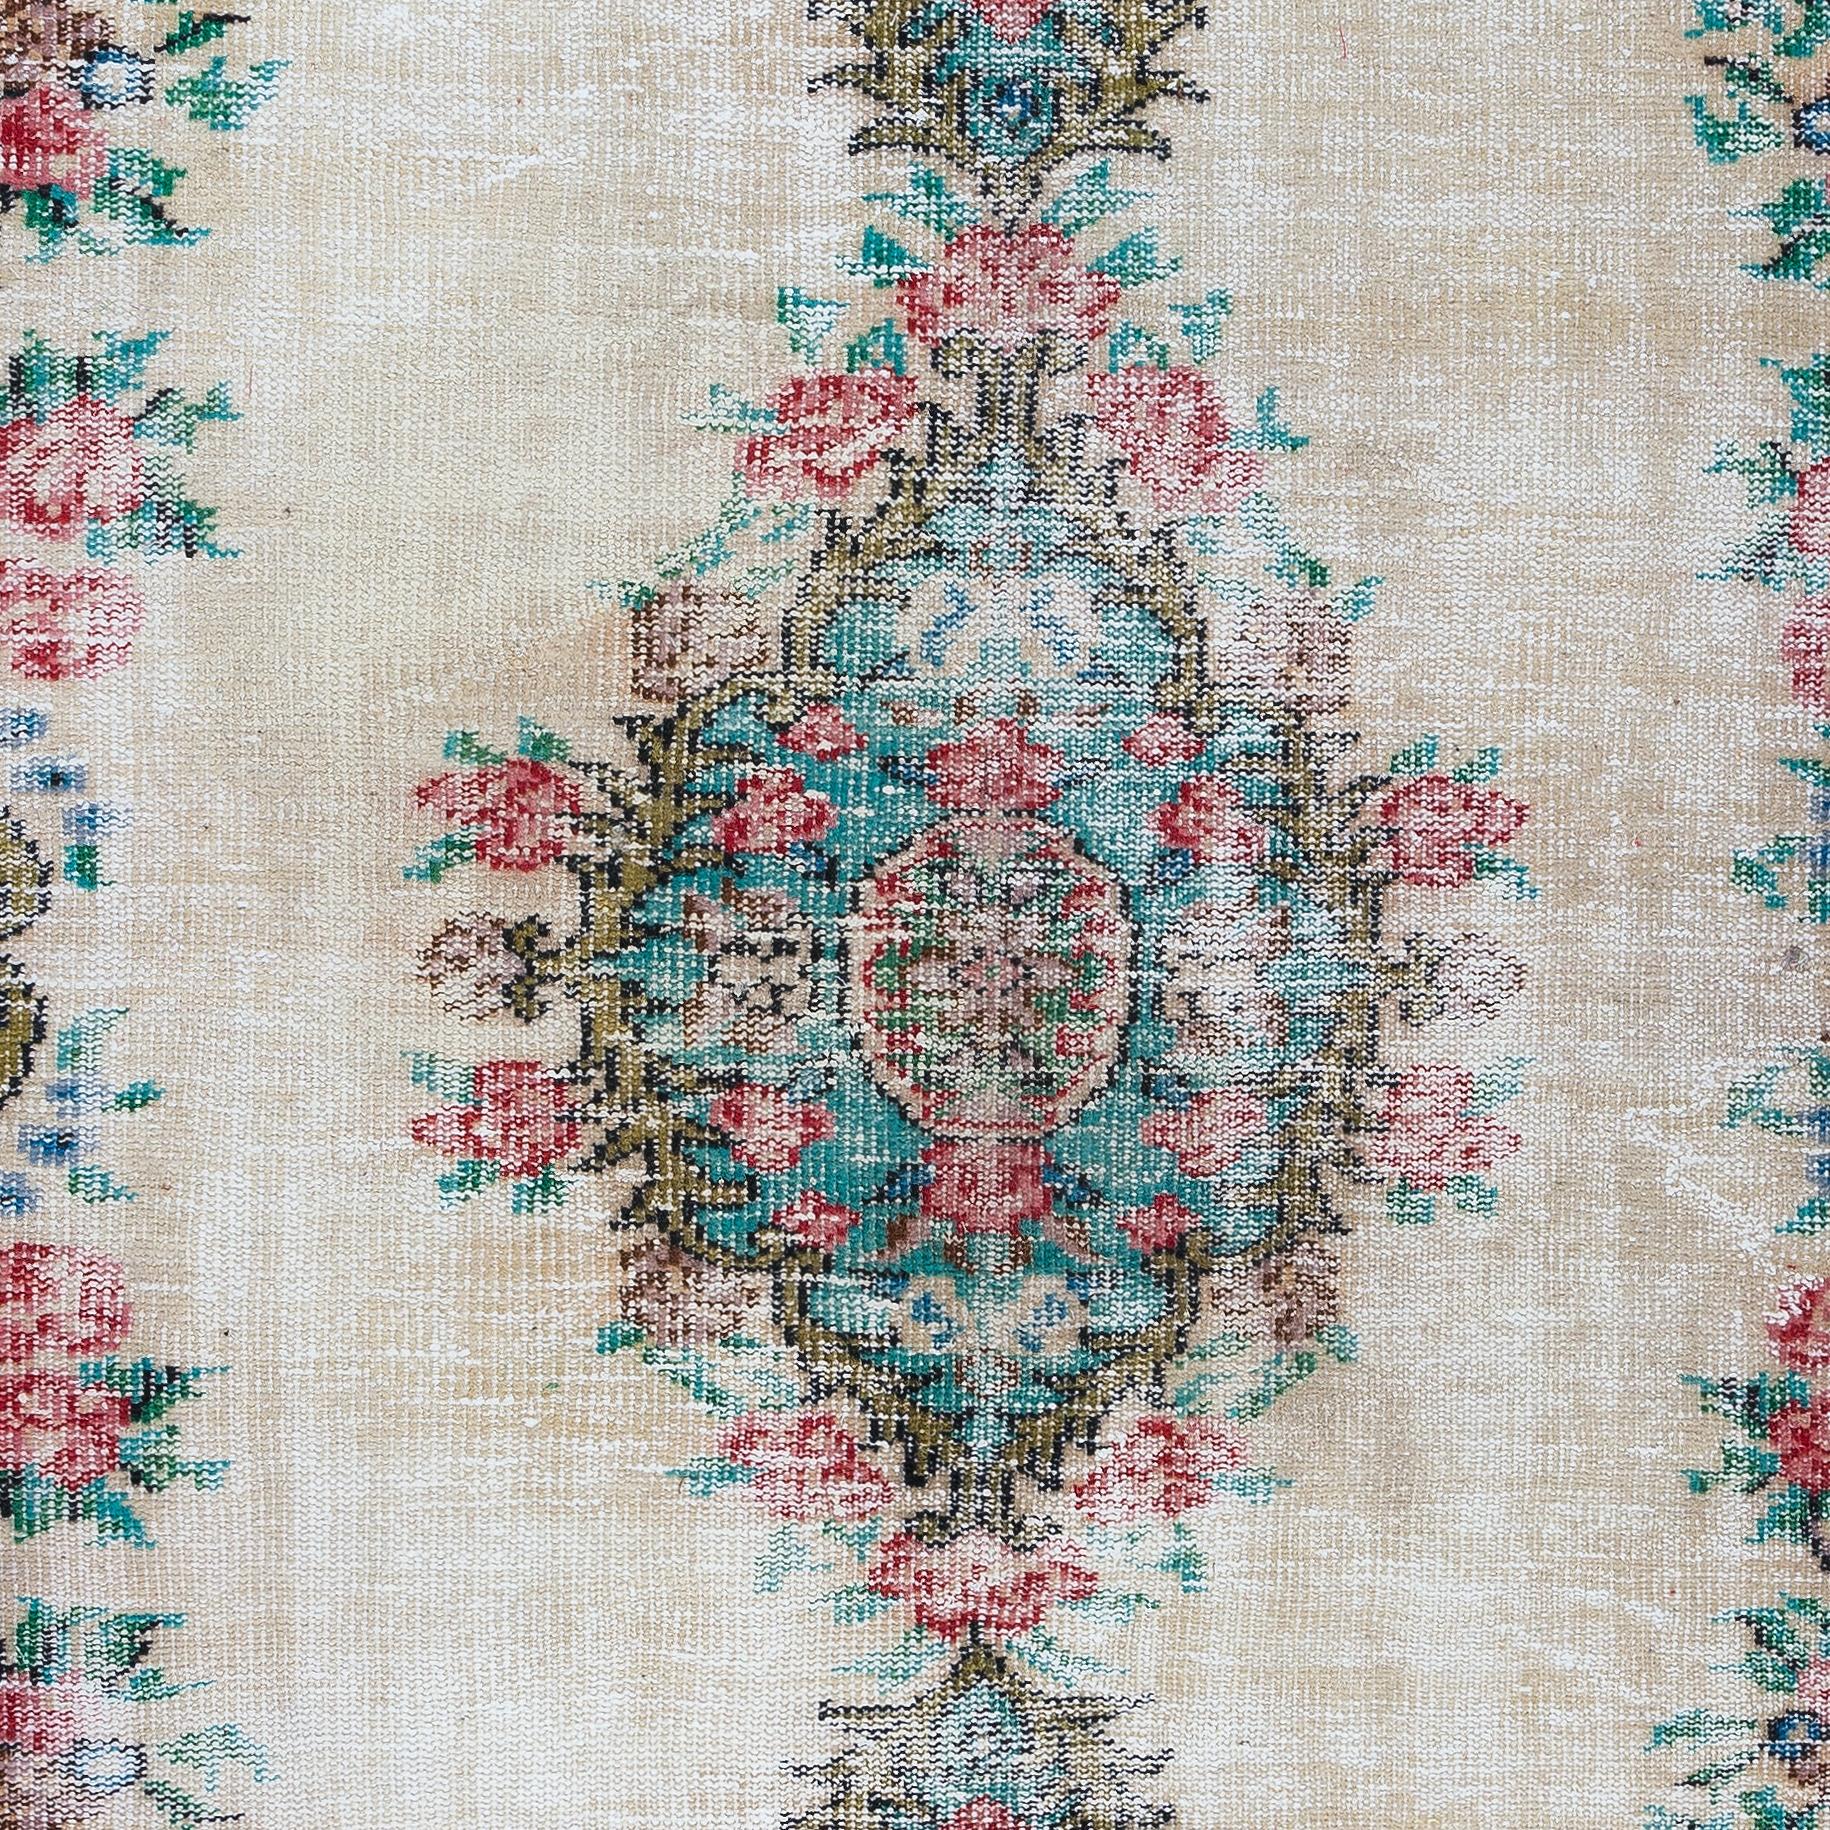 Hand-Woven 5.6x8.8 Ft Handmade Turkish Area Rug with Roses, Vintage Flower Design Carpet For Sale